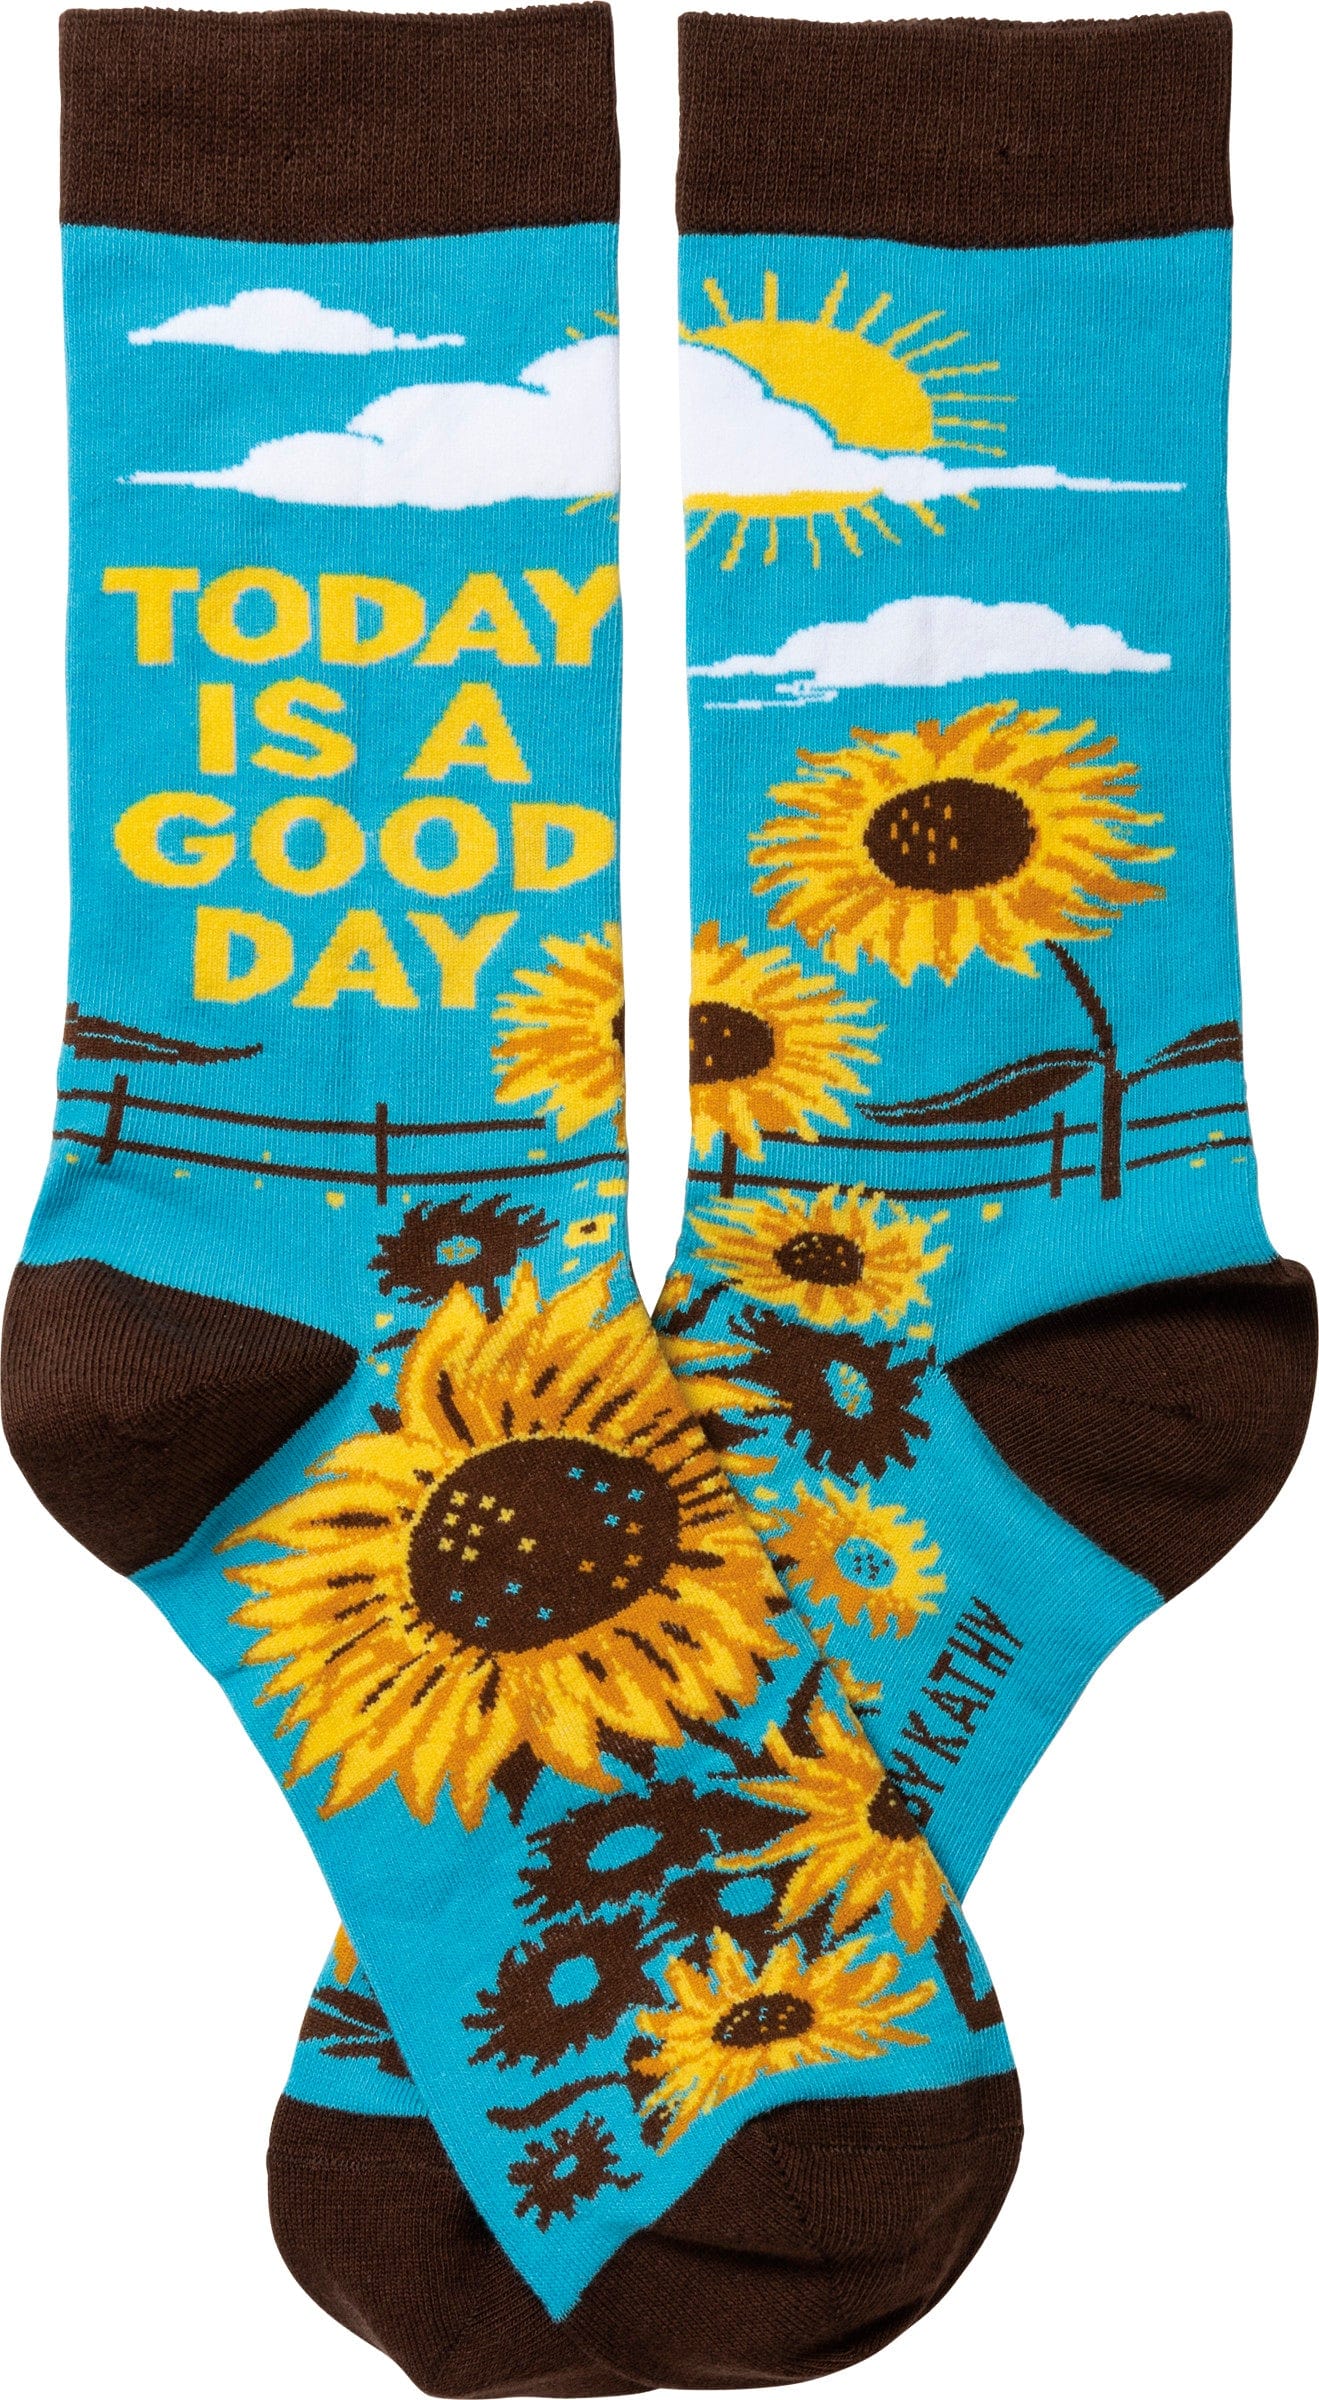 Socks One Size Fits Most Socks - Today Is A Good Day PBK-105096